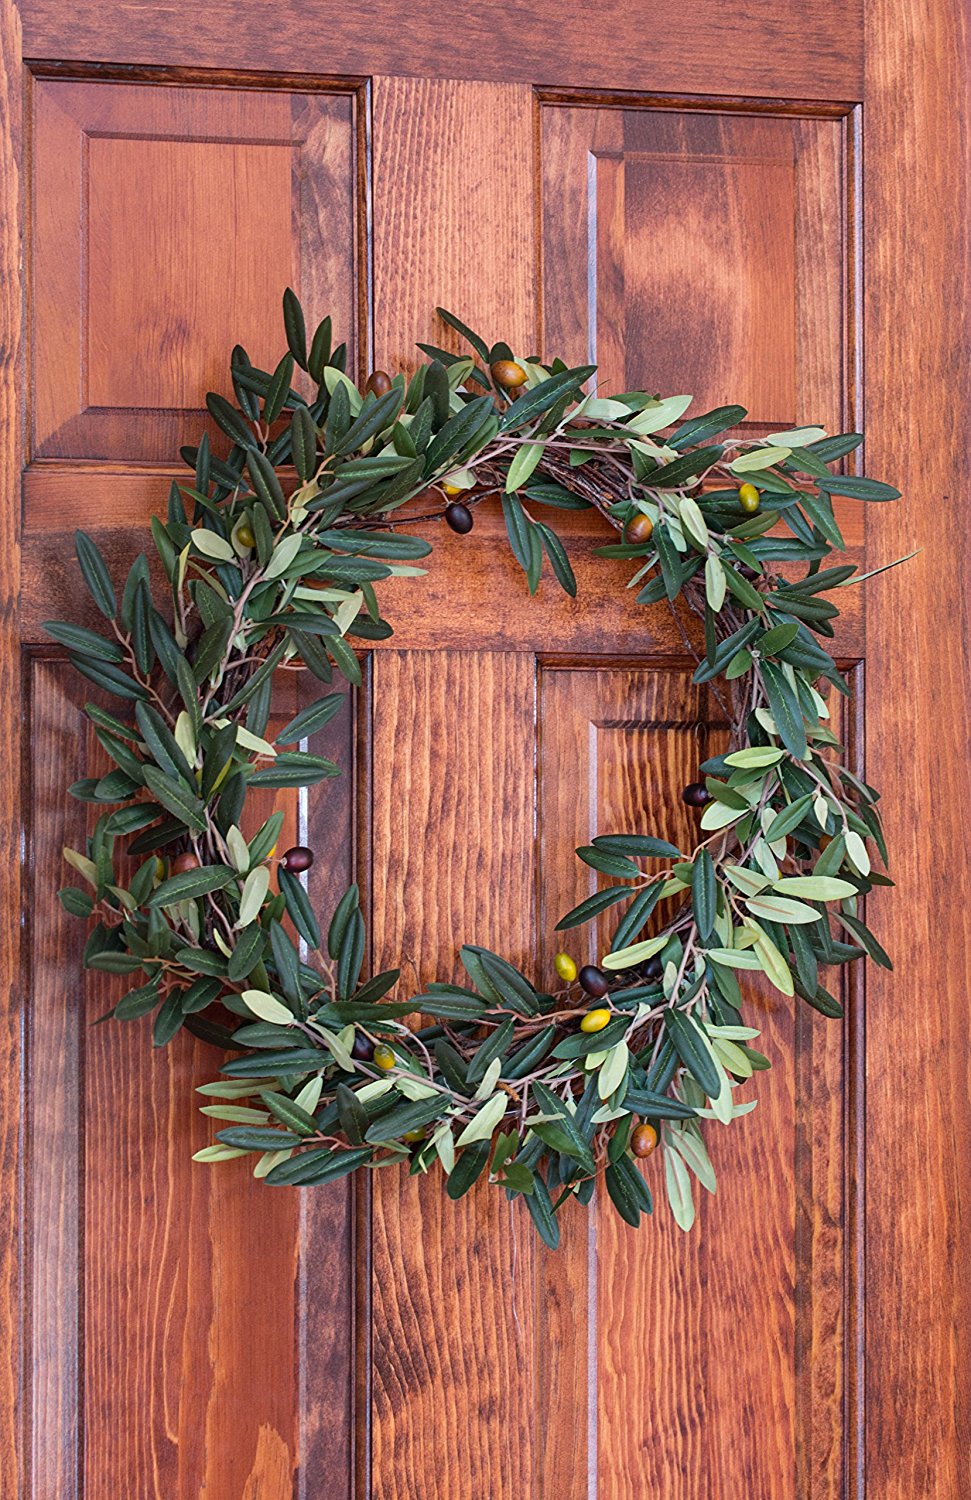 A large olive green leaf wreath with small olives on it hanging on a dark wooden door.